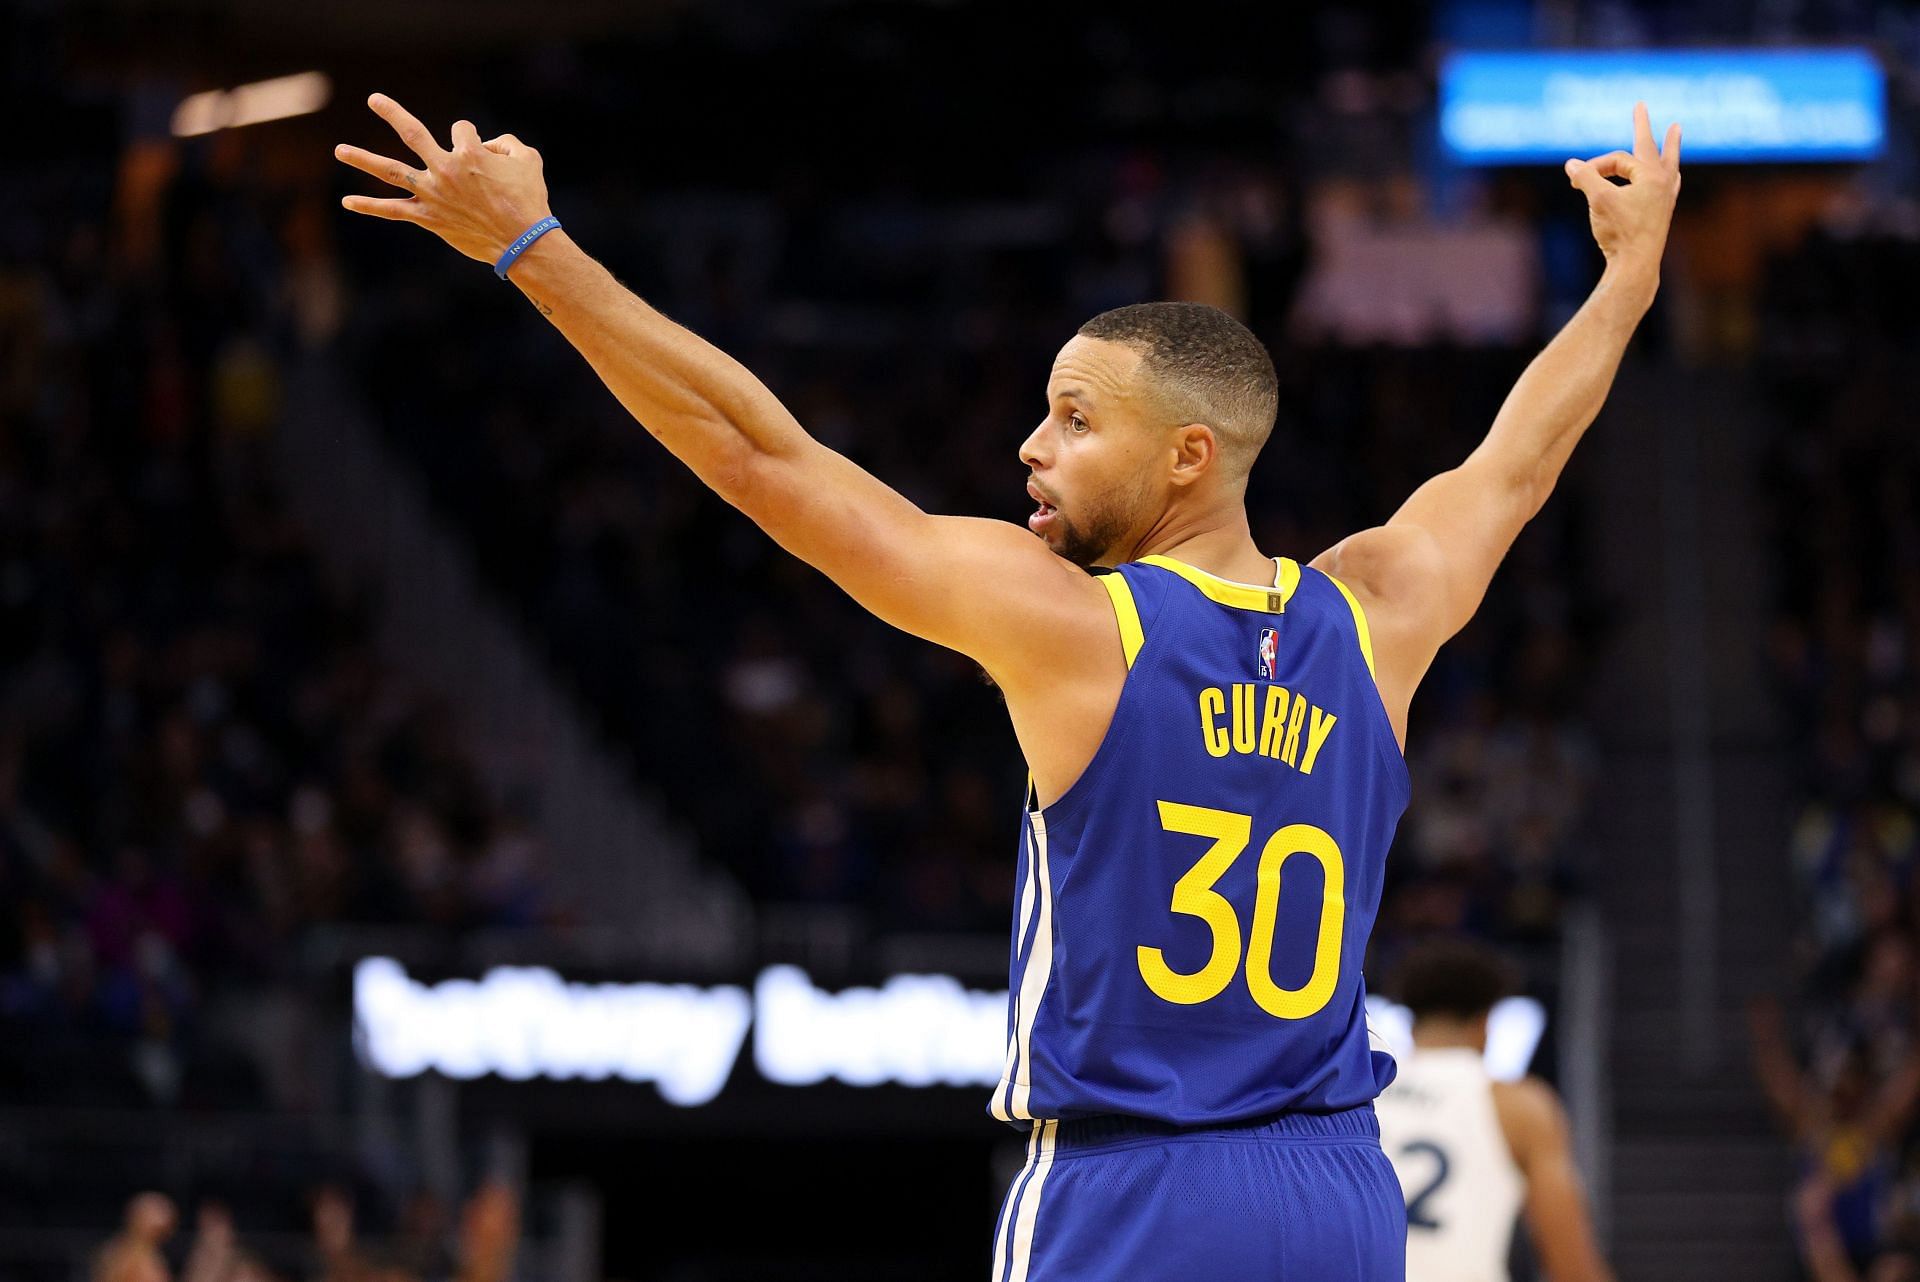 Stephen Curry #30 of the Golden State Warriors reacts after the Warriors made a three point basket against the Minnesota Timberwolves at Chase Center on November 10, 2021 in San Francisco, California.